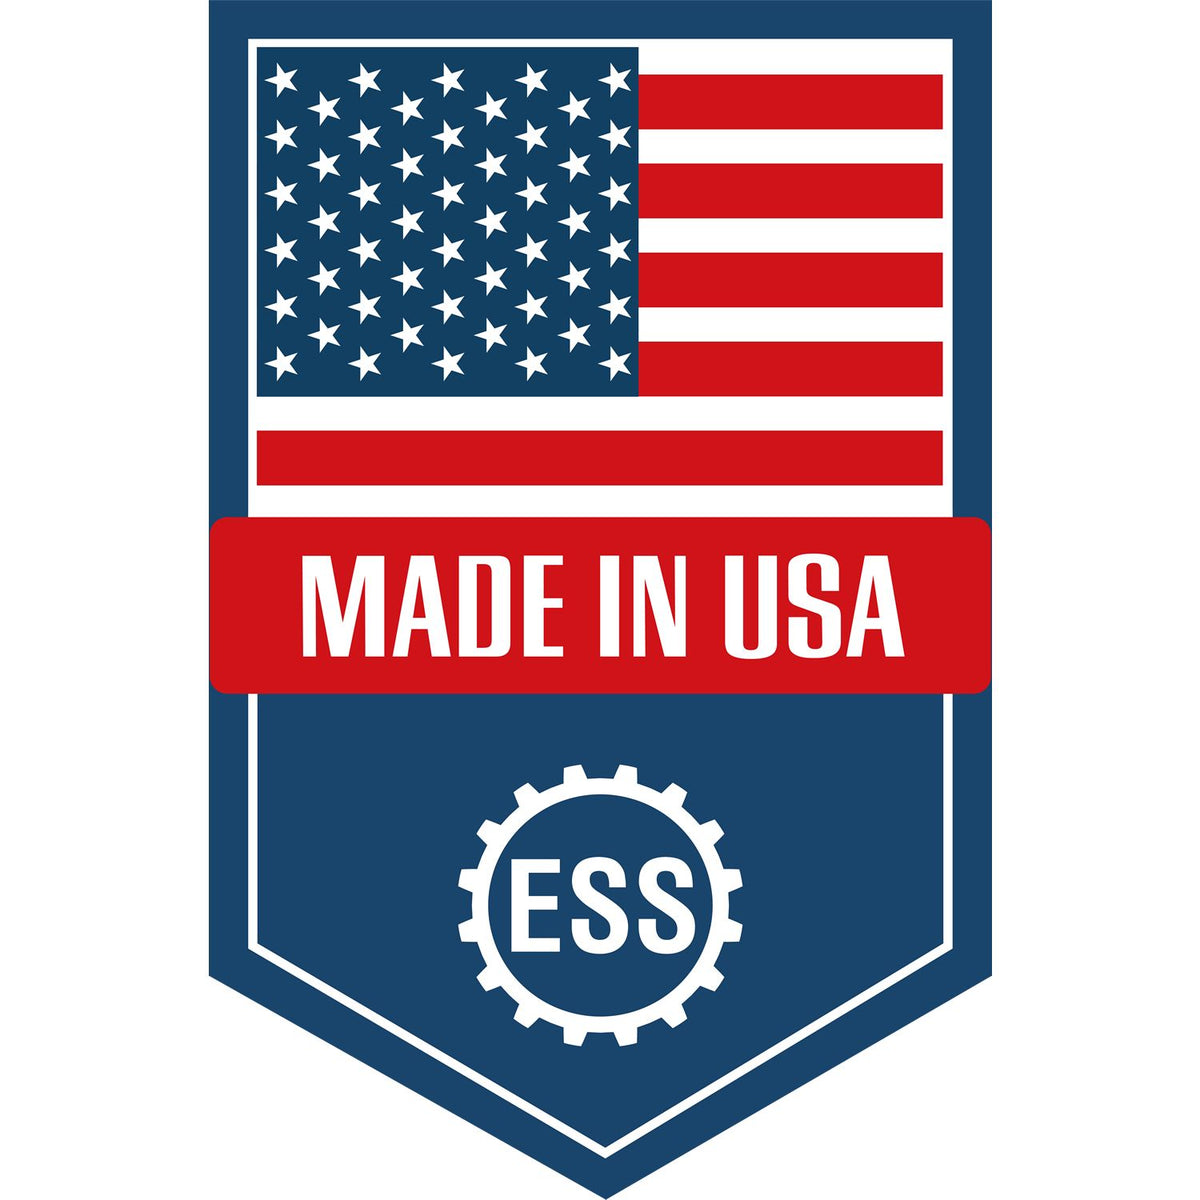 An icon or graphic with an american flag and text reading Made in USA for the West Virginia Professional Engineer Seal Stamp